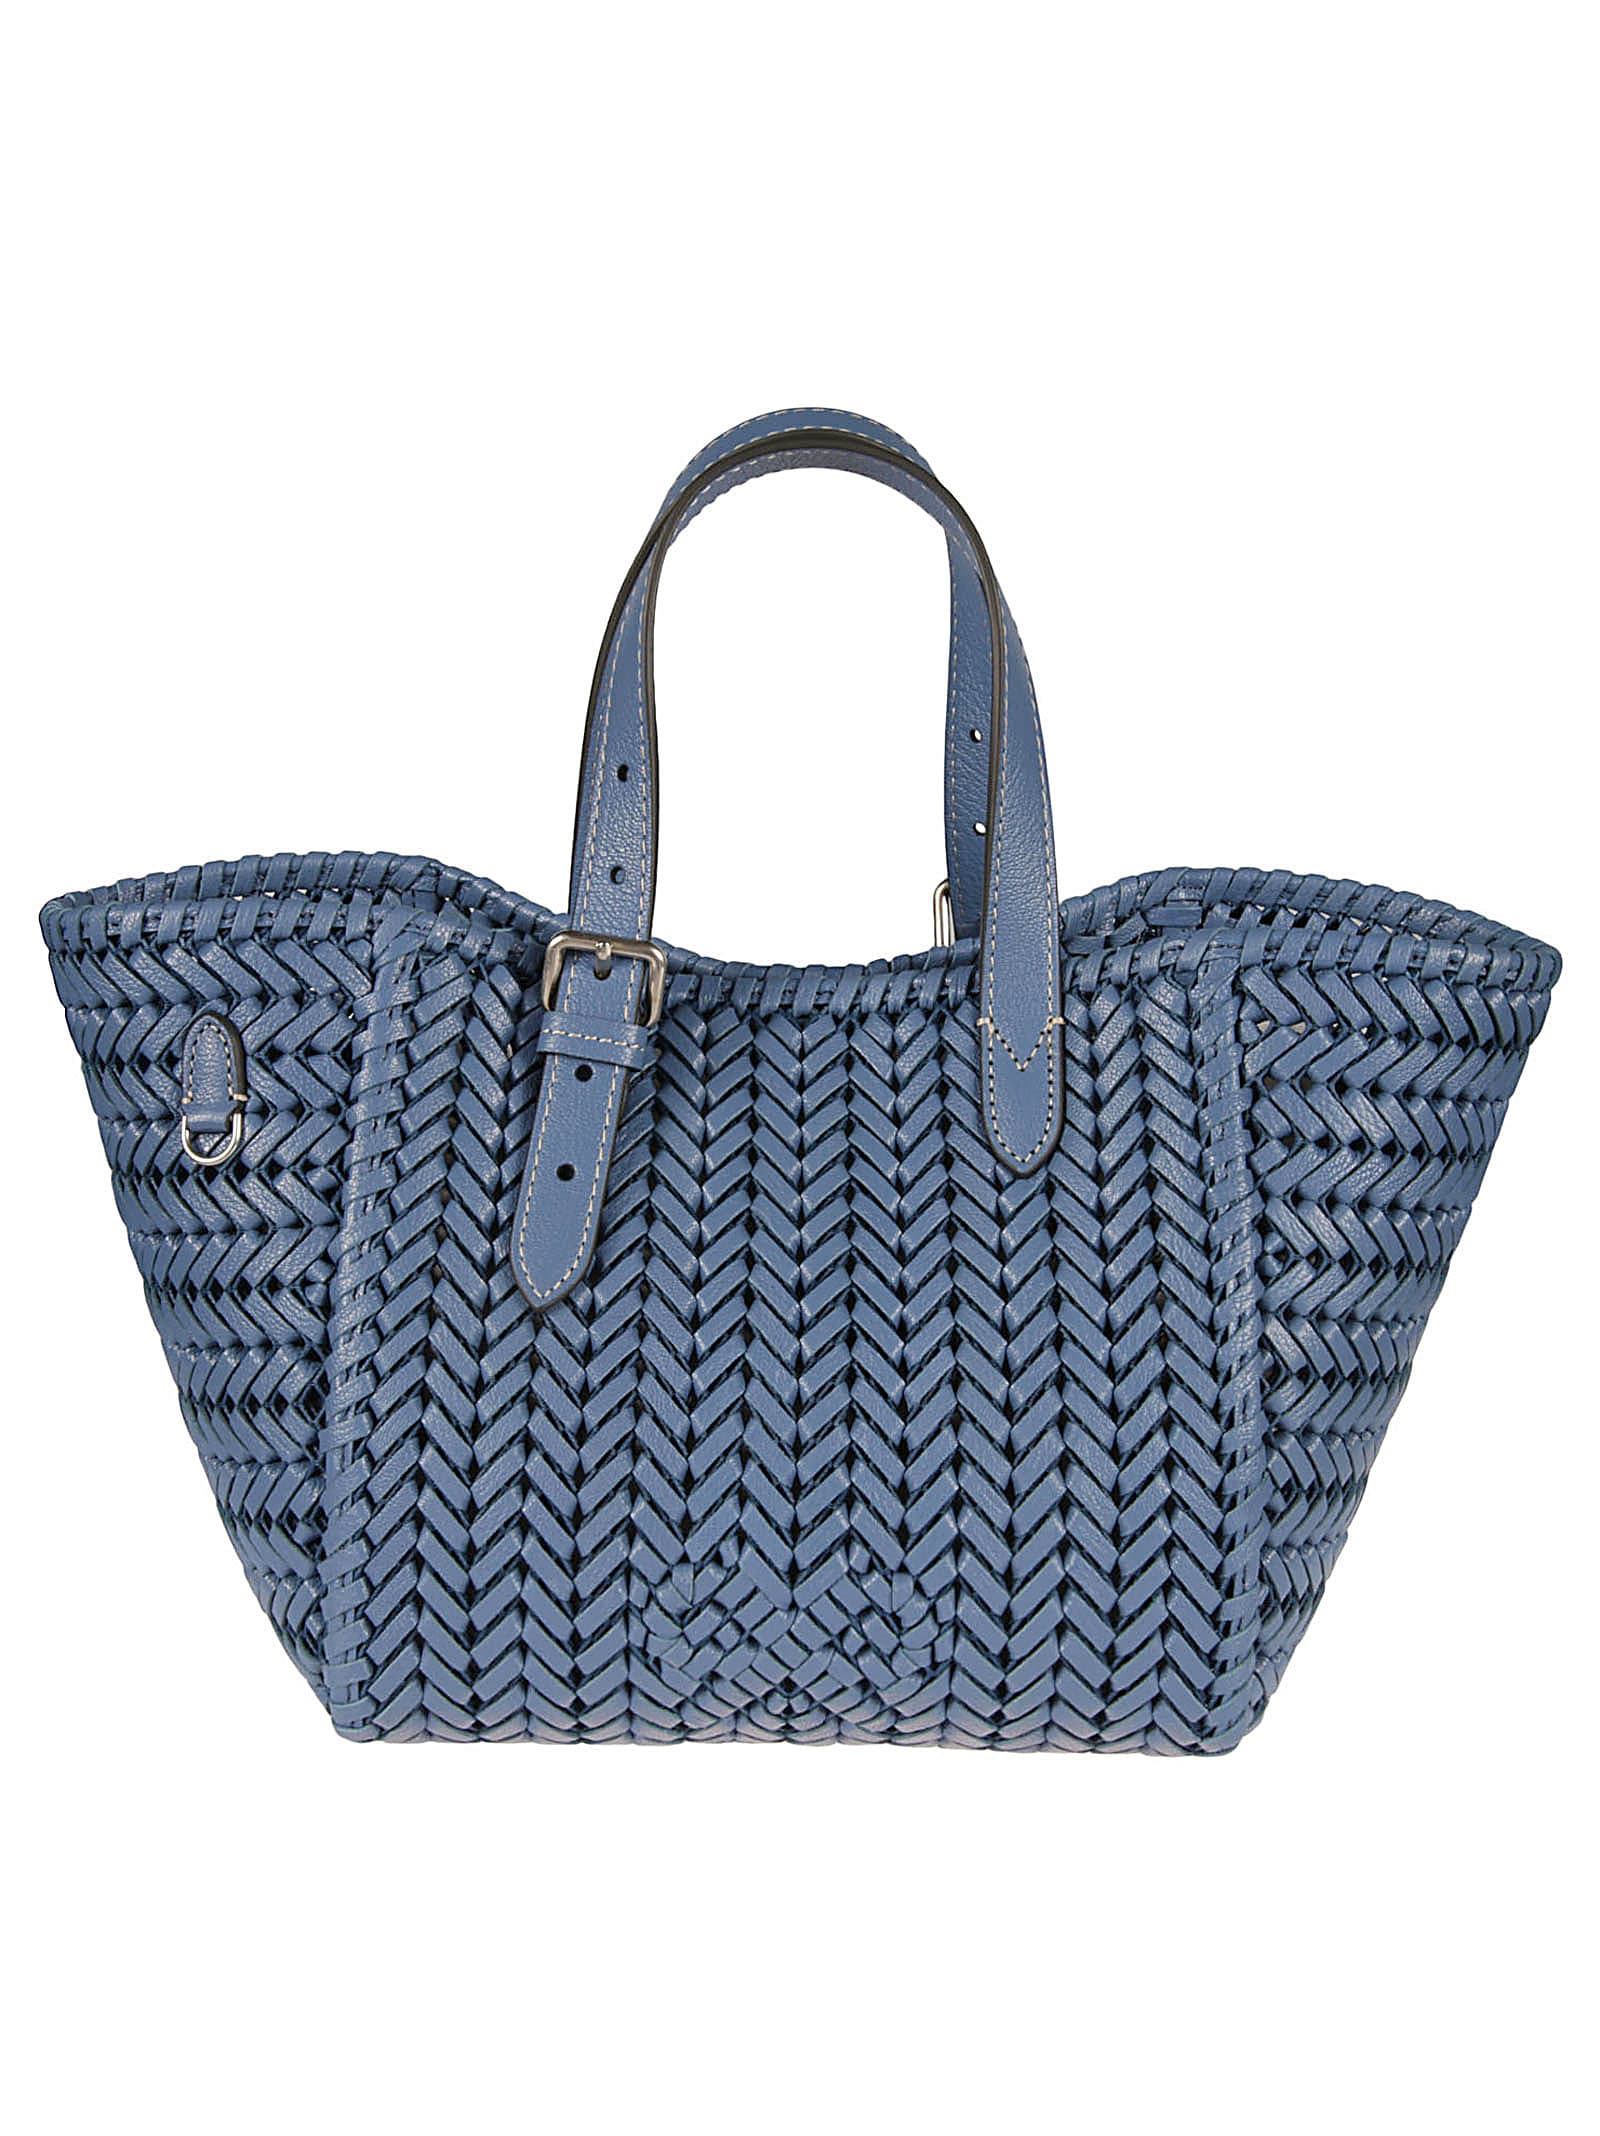 Anya Hindmarch Buckled Top Handle Woven Tote